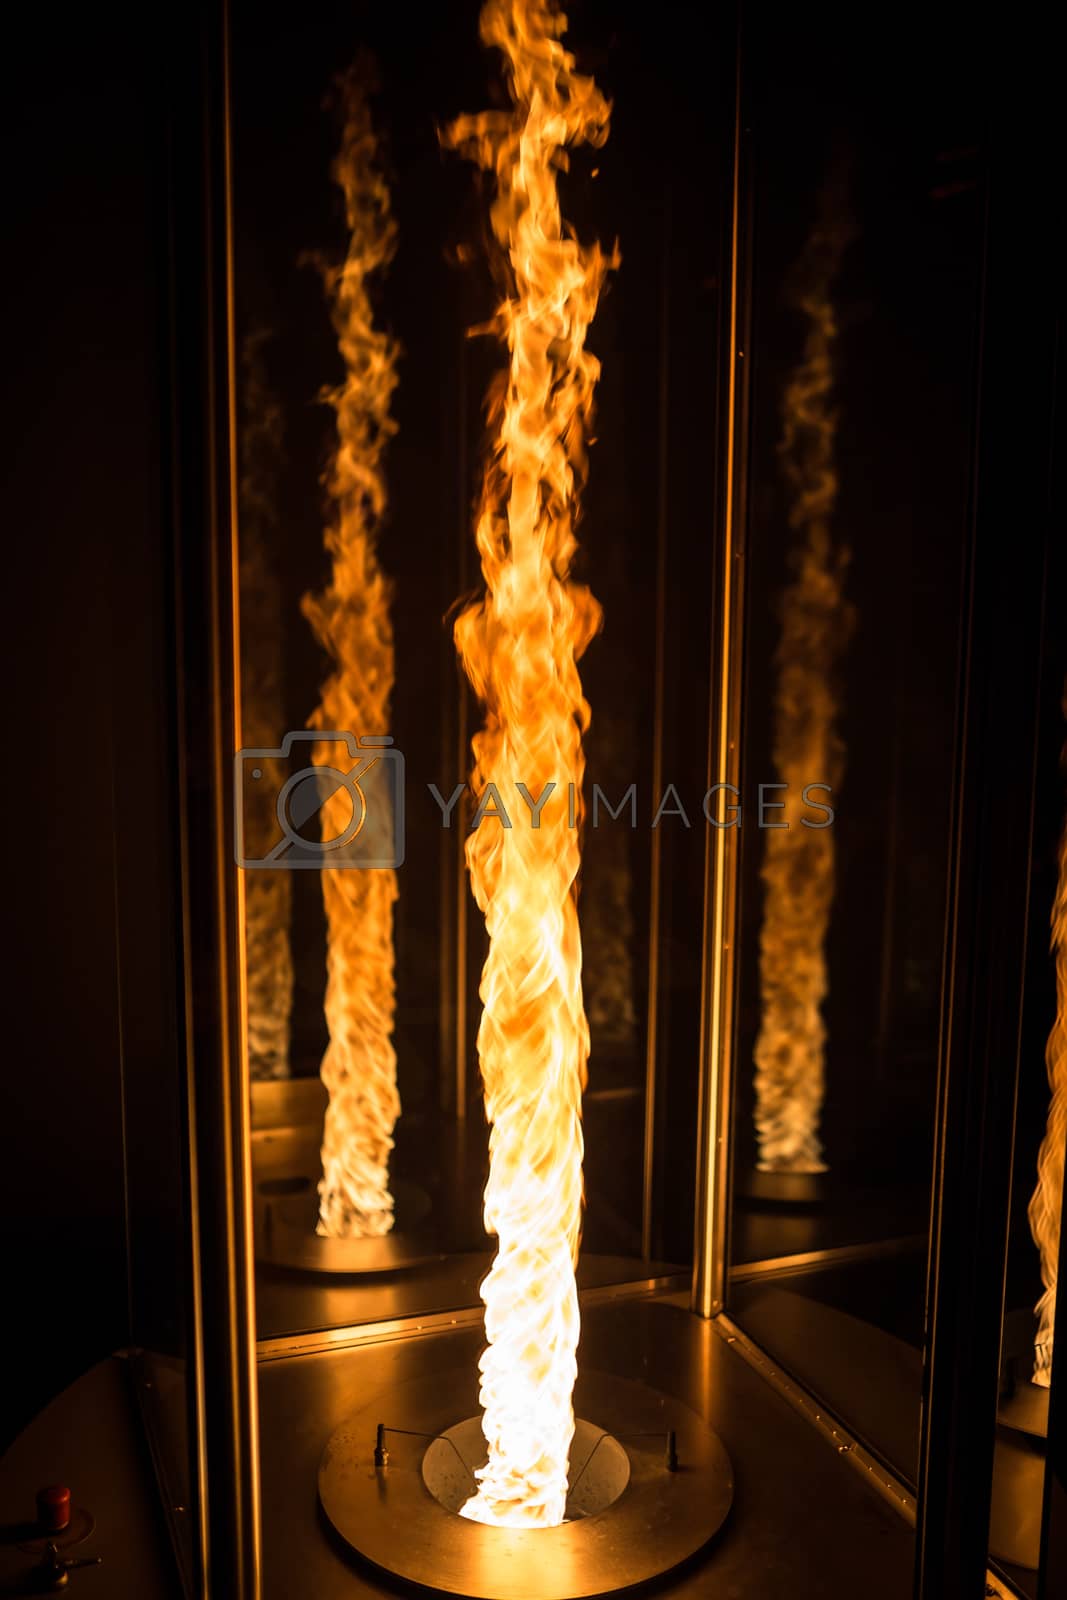 Royalty free image of Fire tornado made in a laboratory controlled enviroment by petrsvoboda91